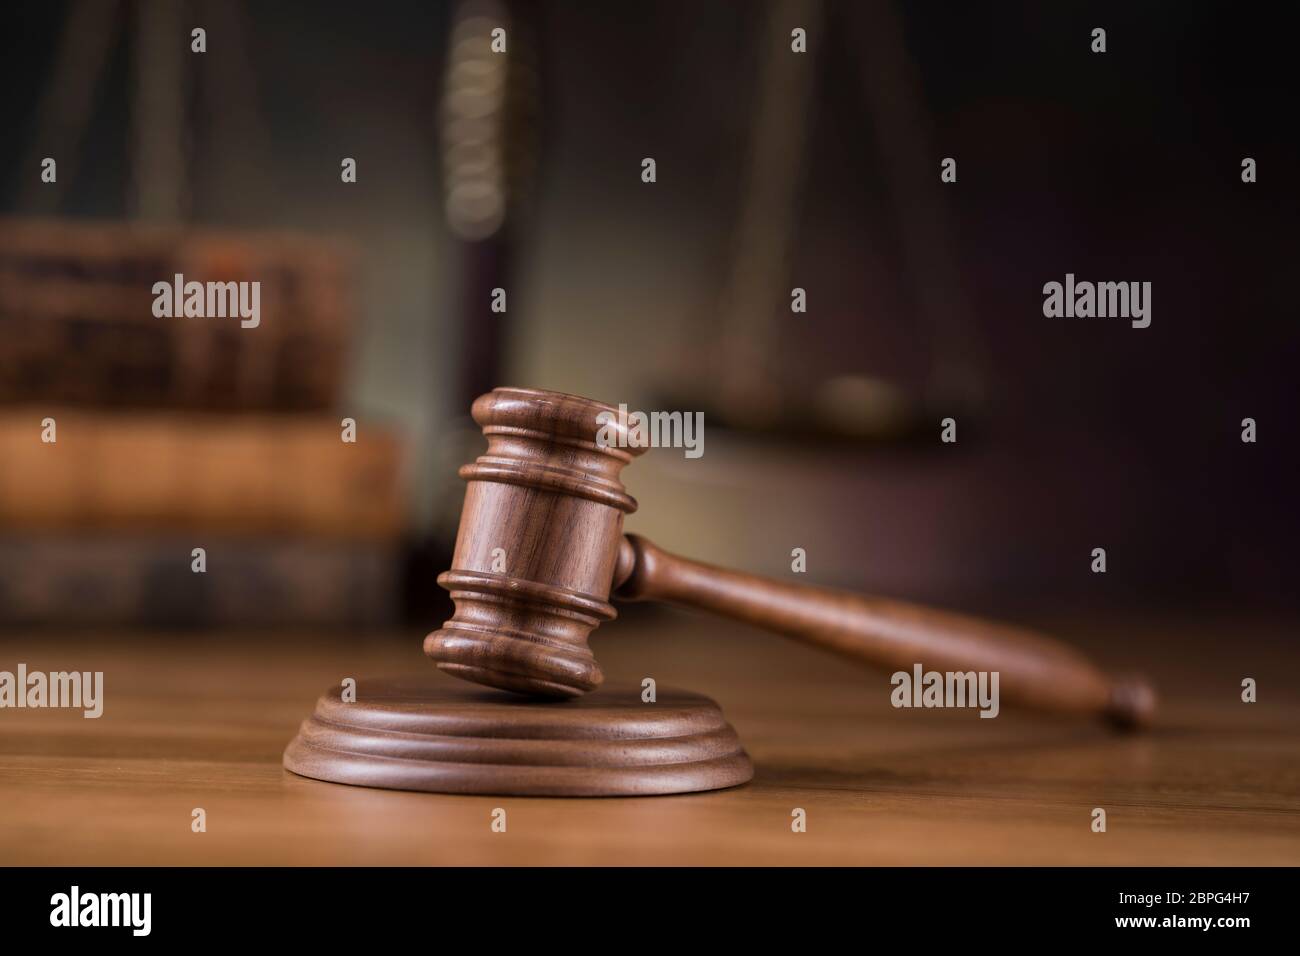 Law wooden gavel barrister, justice concept, legal system concept Stock Photo